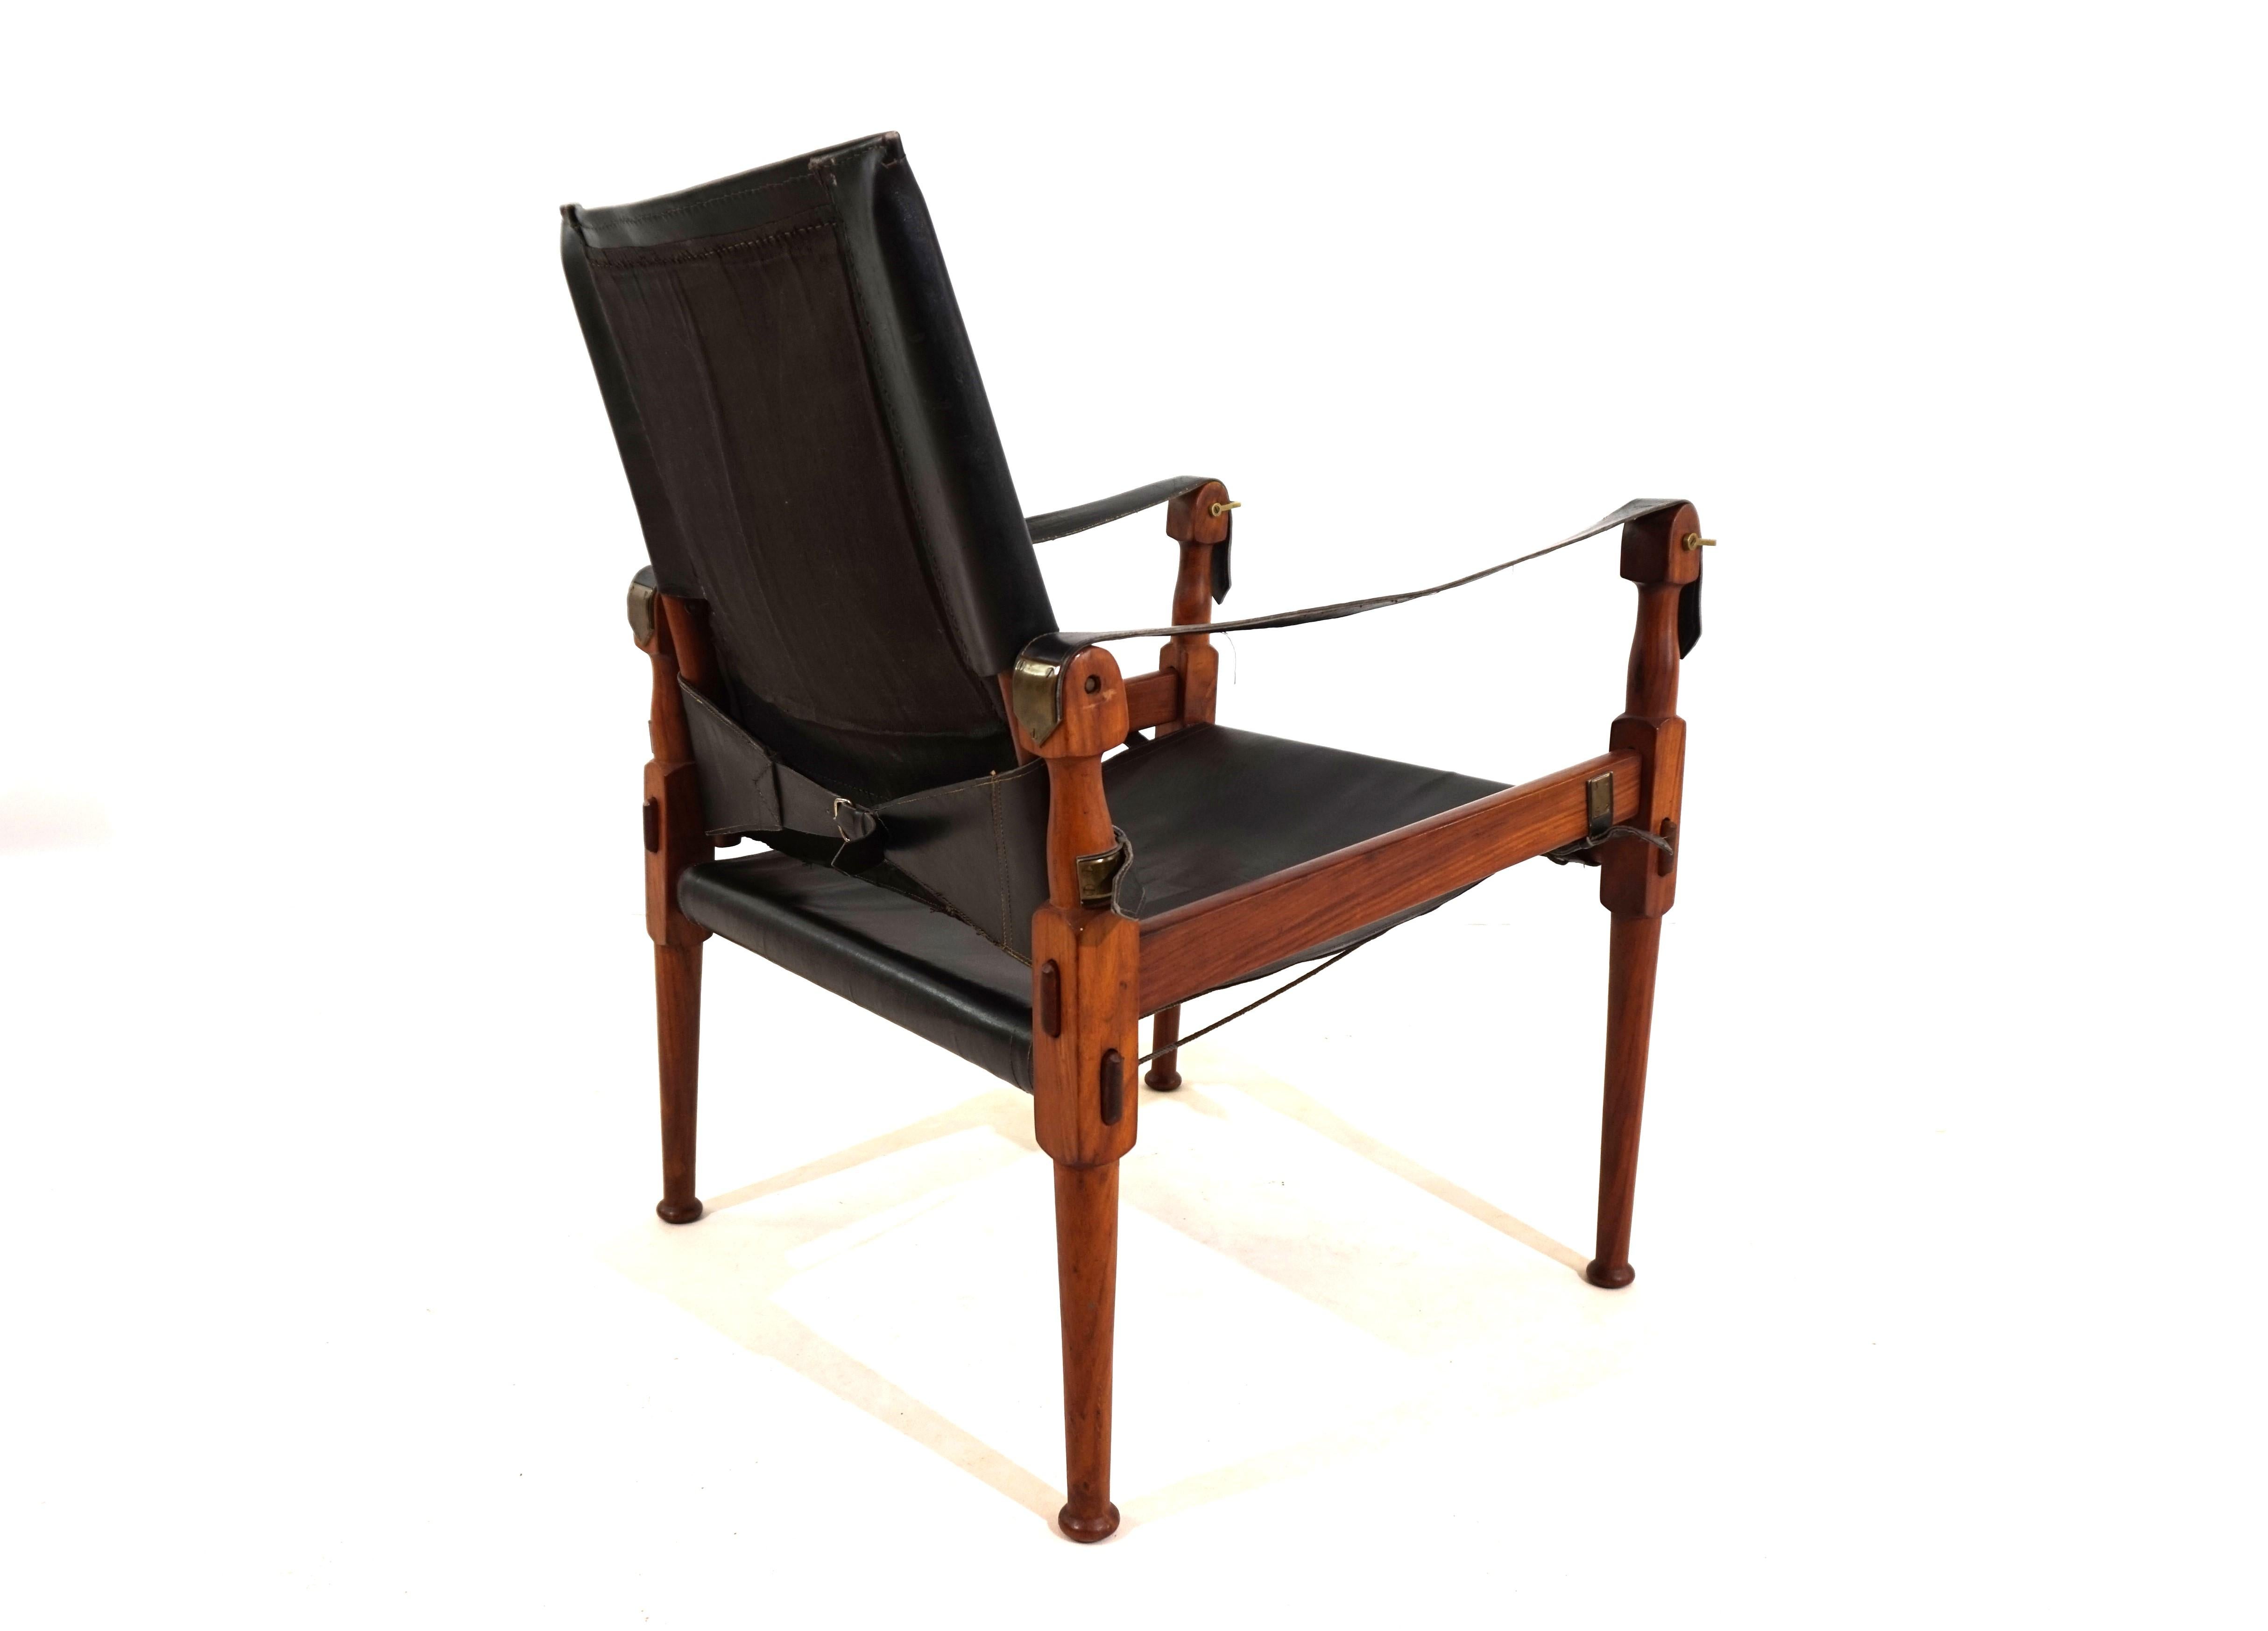 This original Hayat Roorkee Campaign Safari chair from the 60s is in first-class condition. The black leather has almost no visible signs of wear. The wooden frames, made of beautiful teak, are in very good condition. The tension cables are all in